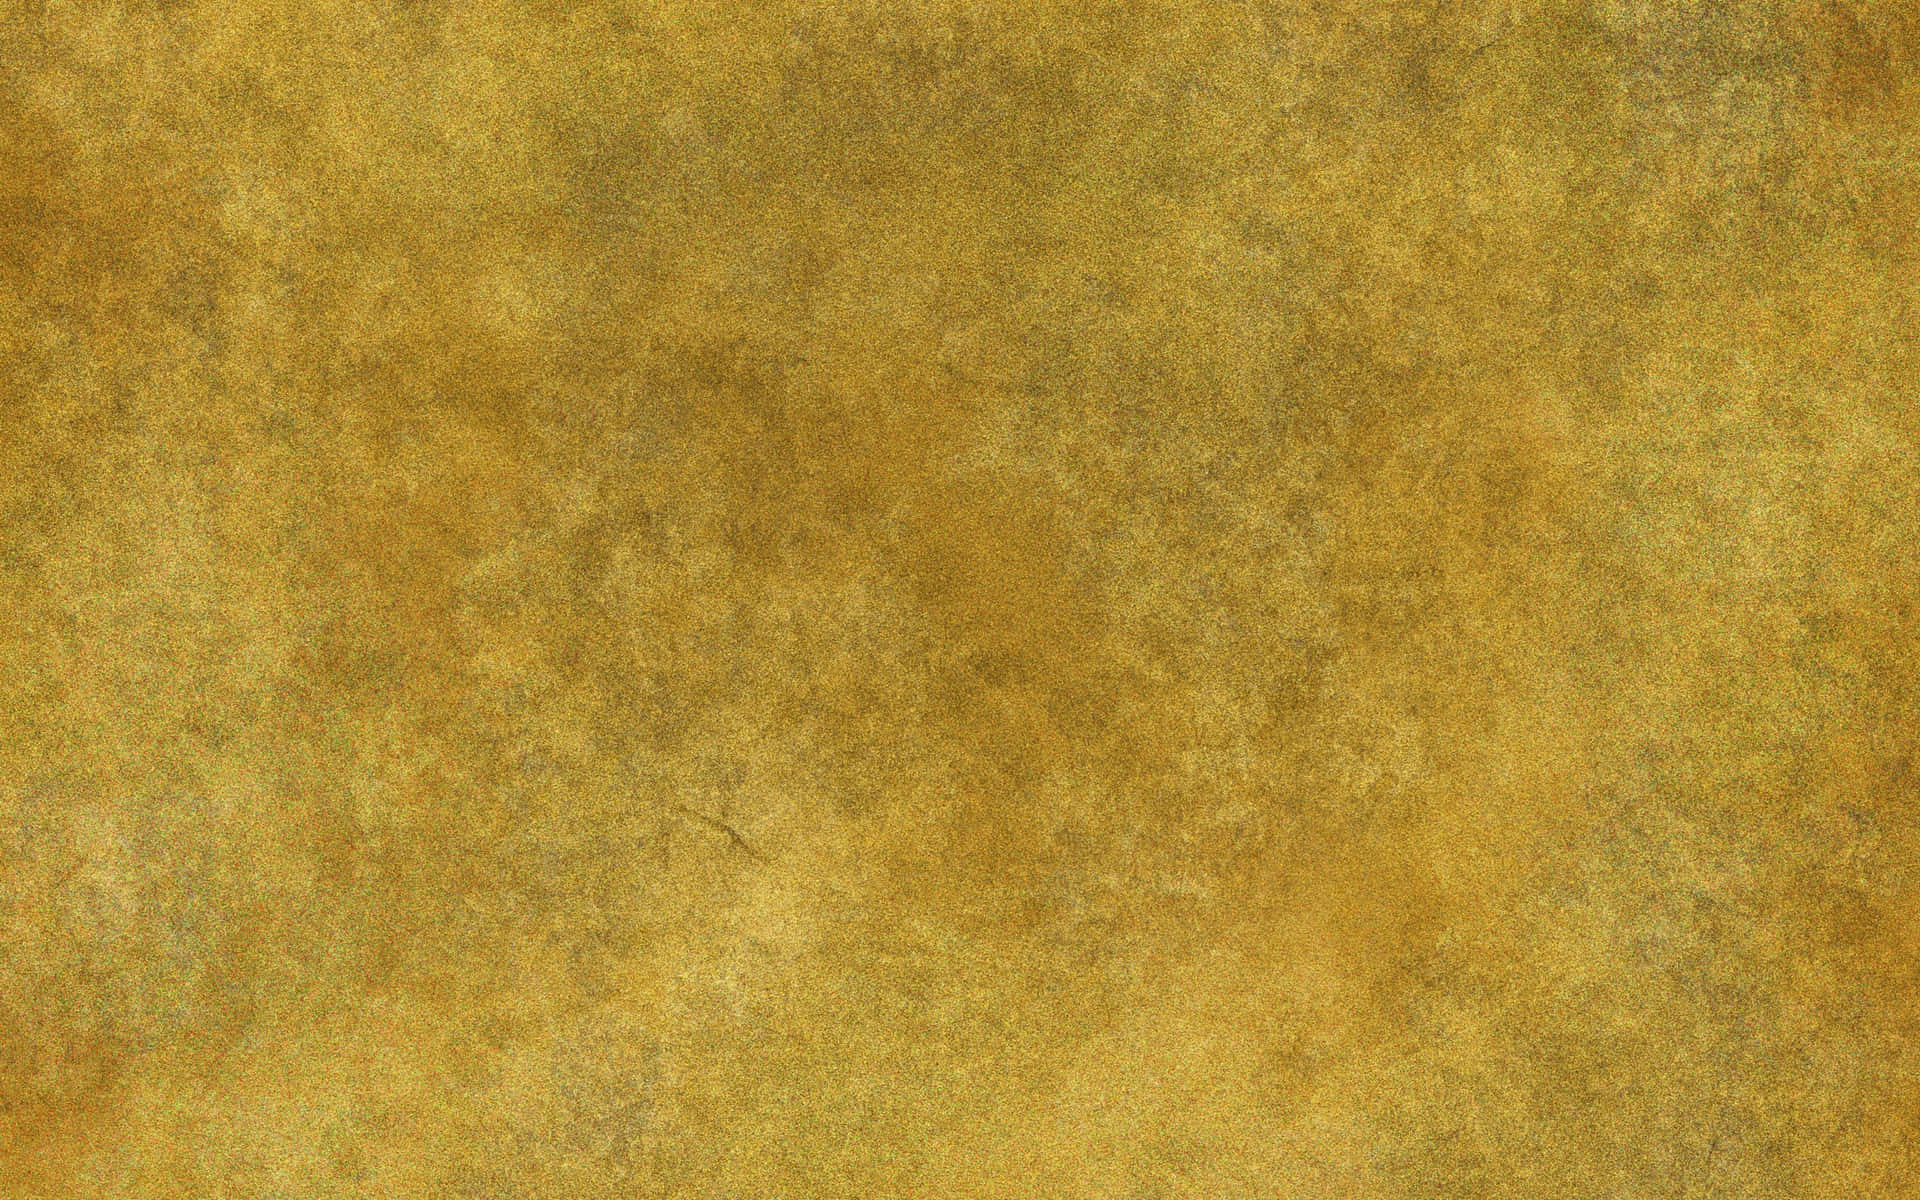 A Yellow Grunge Textured Abstract Wallpaper